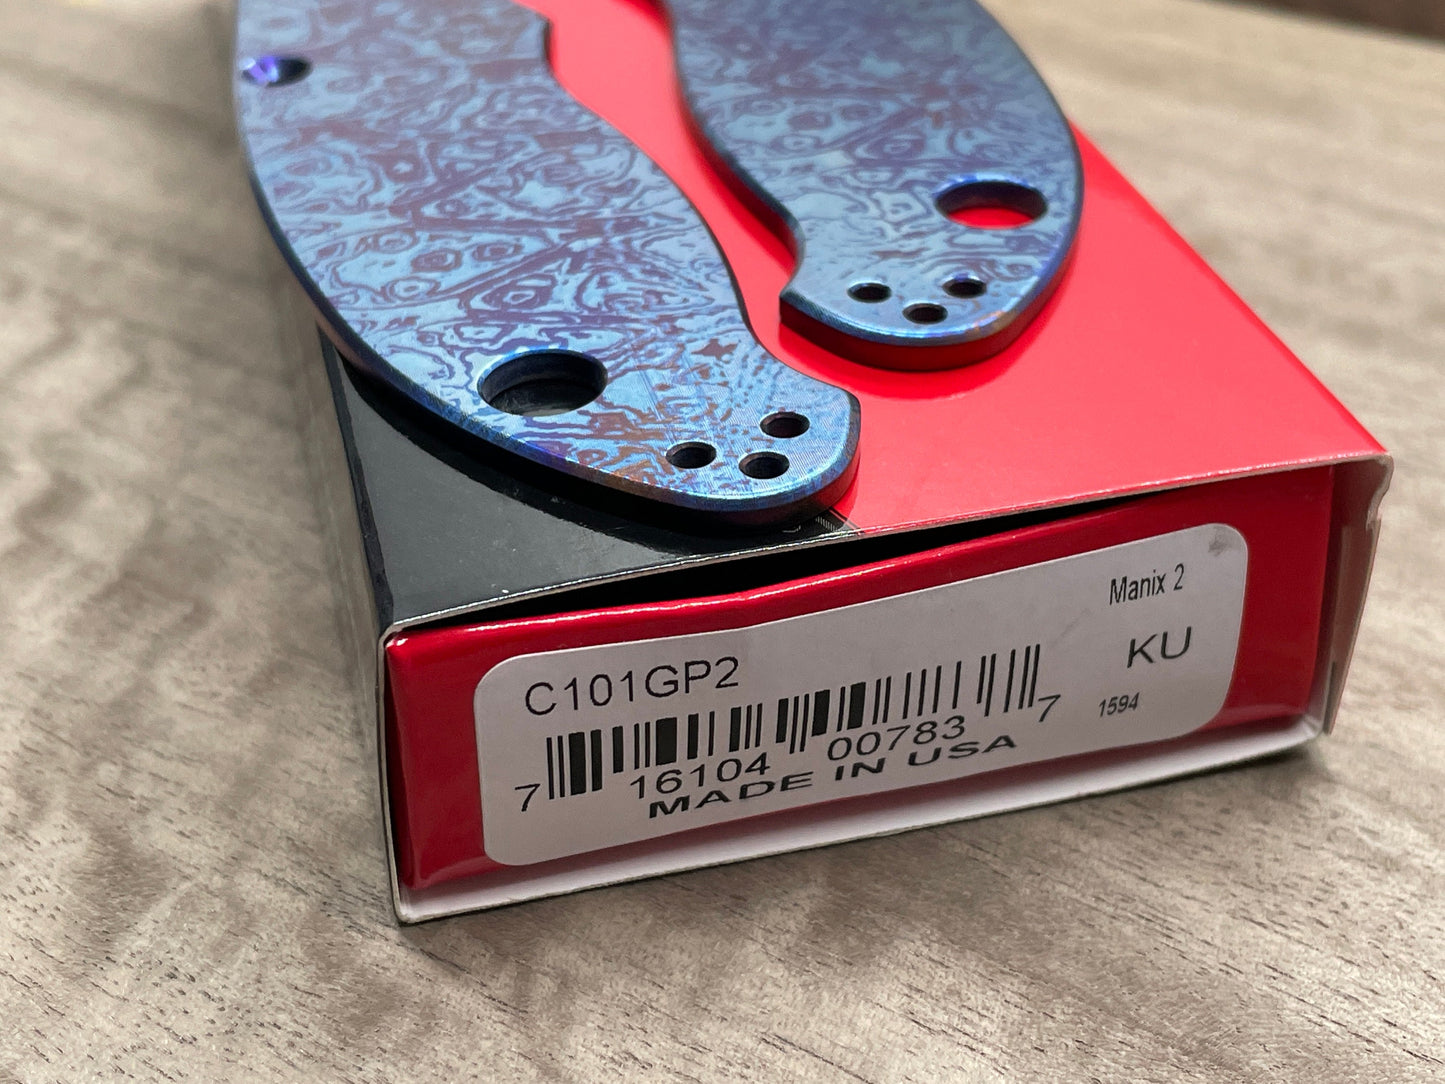 Flamed TOPO engraved Titanium scales for Spyderco MANIX 2